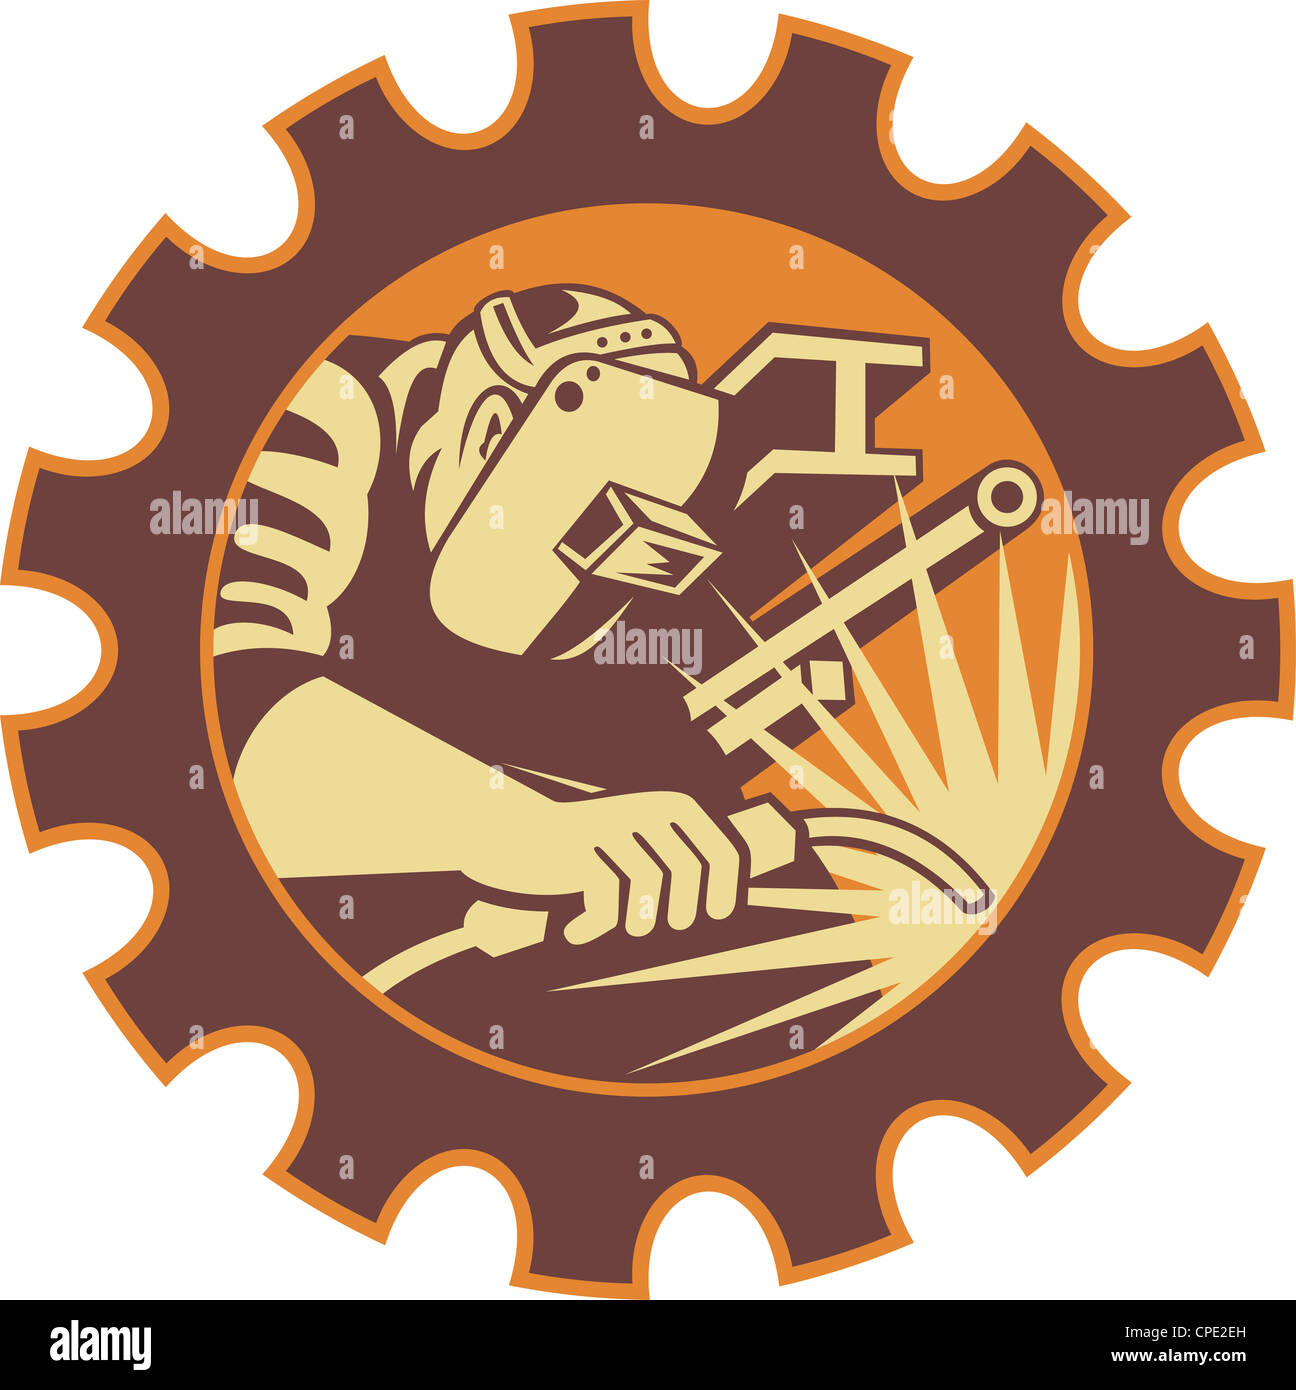 Illustration of a welder fabricator worker welding torch with i-beam ...